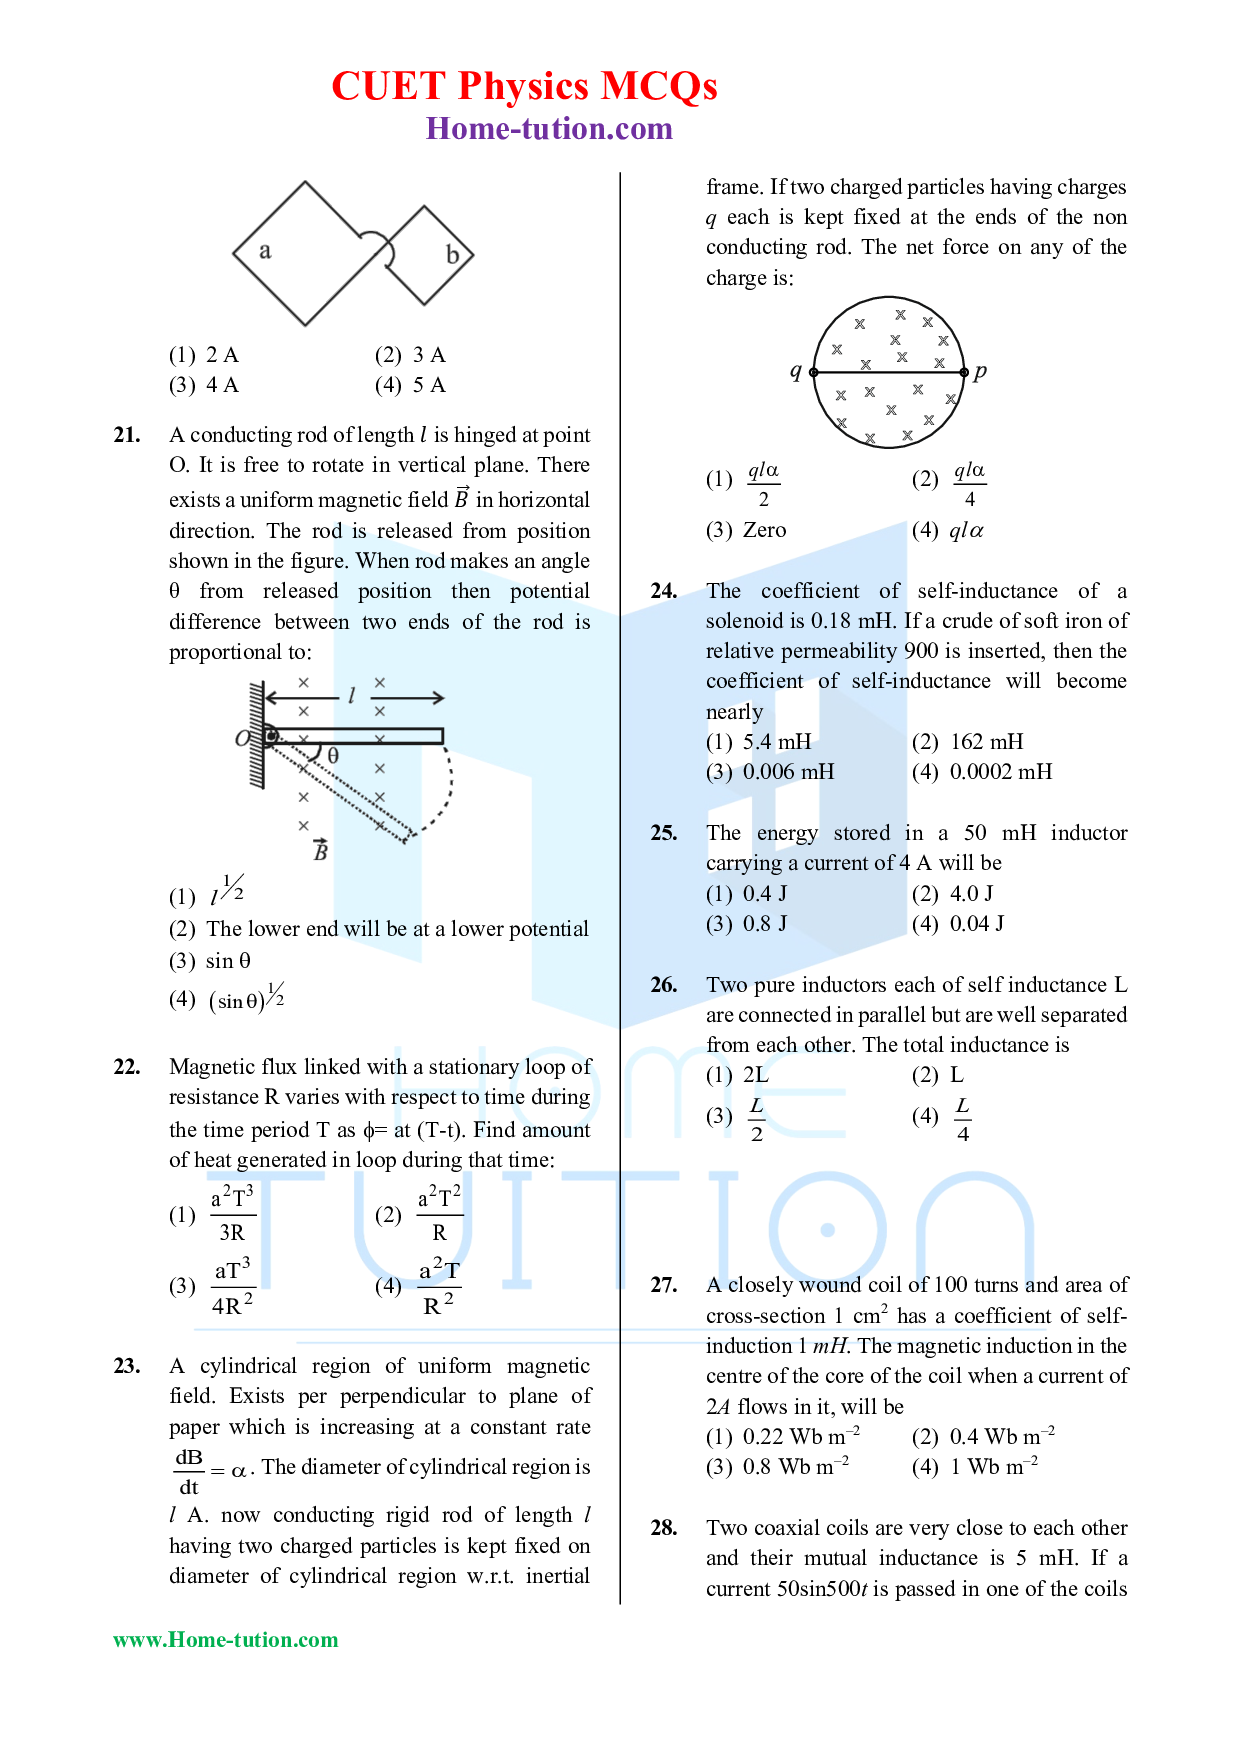 CUET MCQ Questions For Physics Chapter-06 Electromagnetic Induction